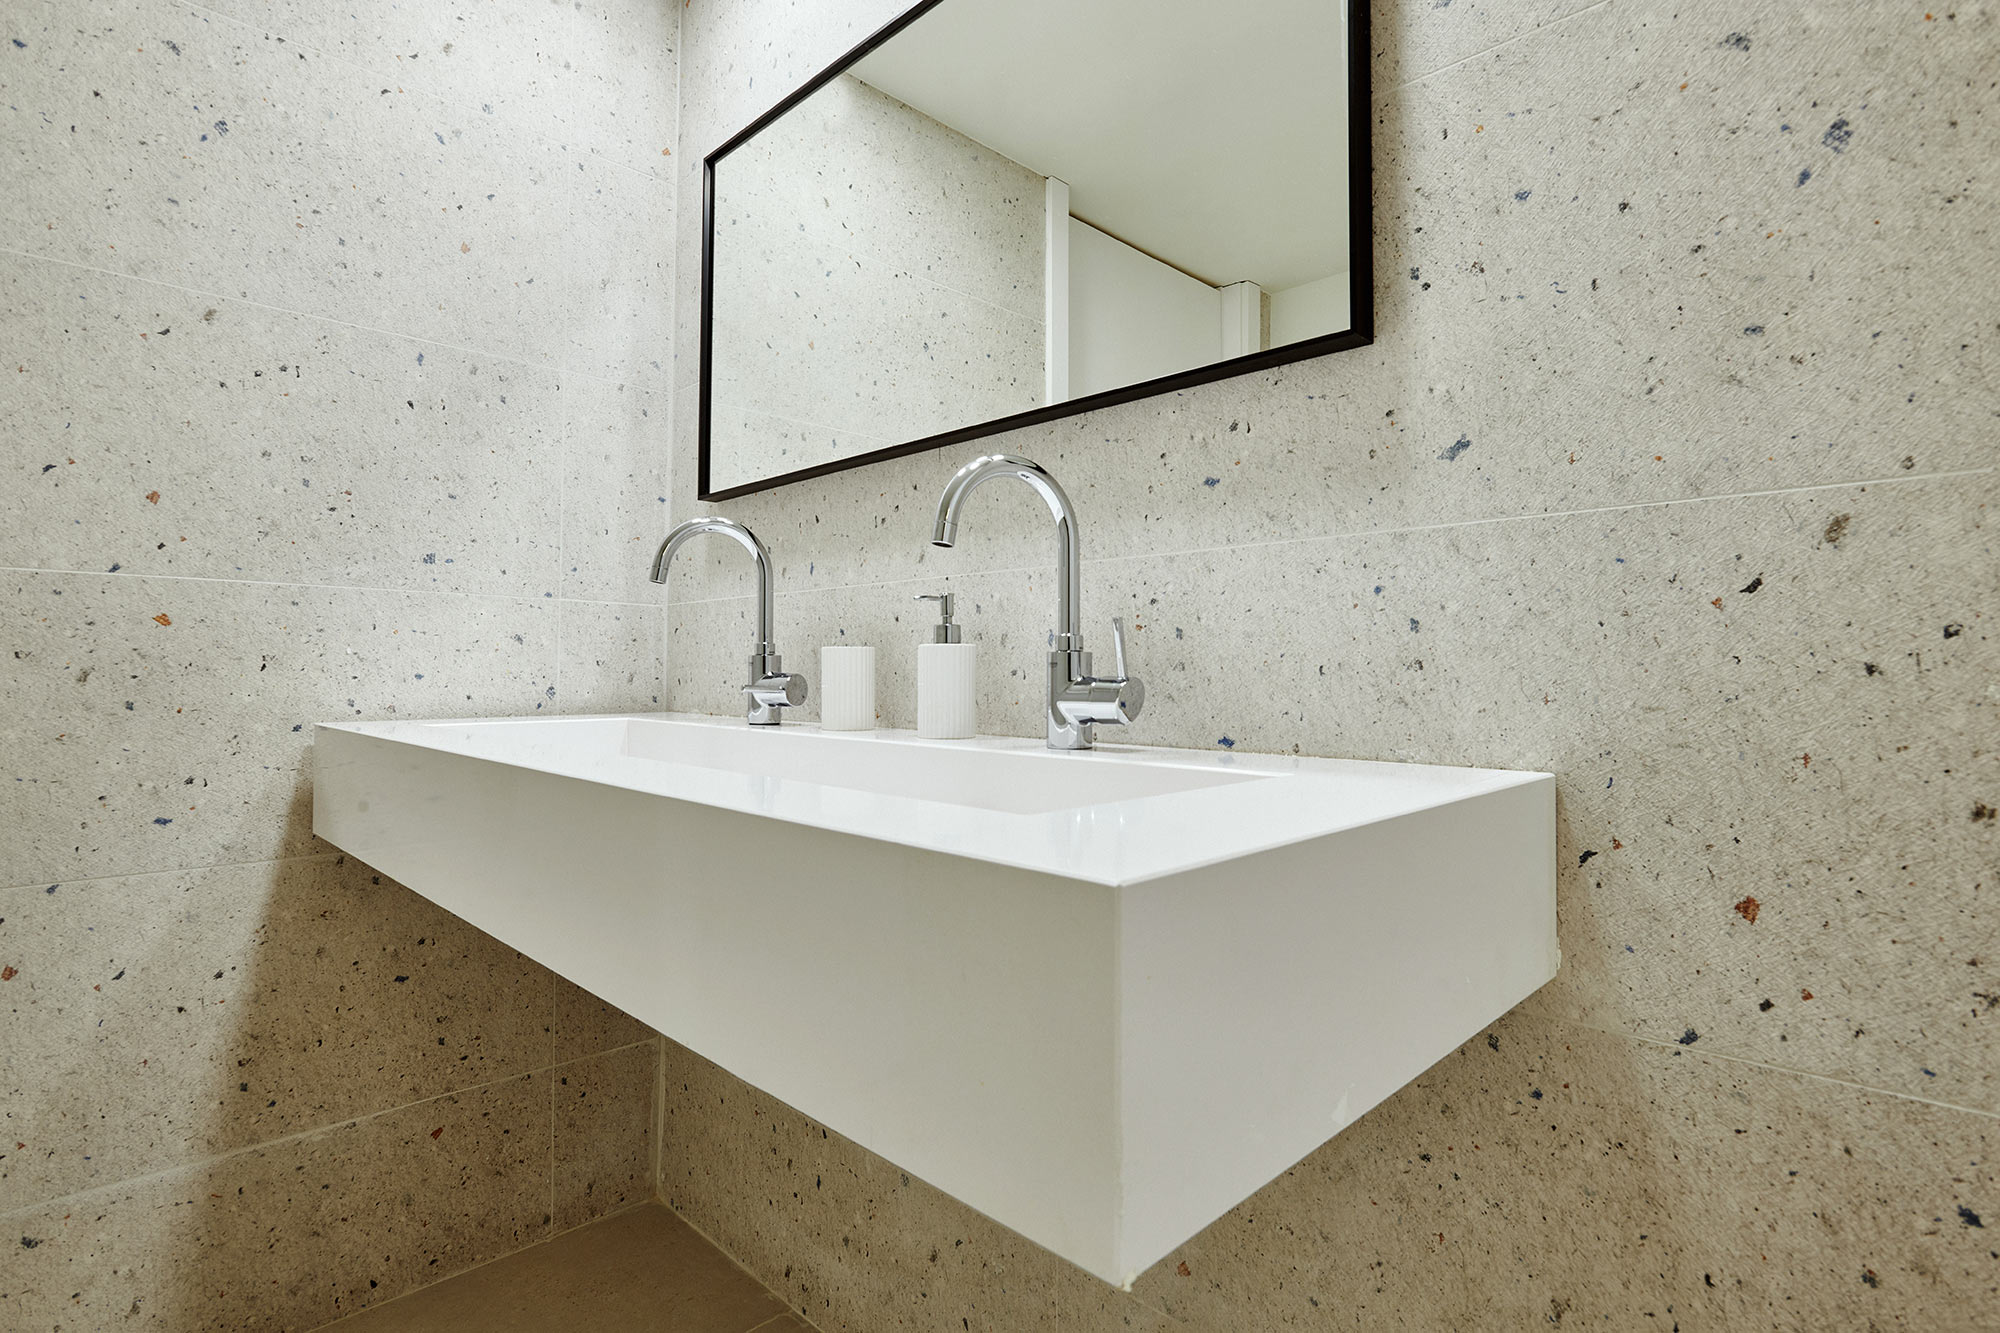 Image of aedas homes bano silestone blanco zeus 4 in Cosentino, the star of the new functional, modern and sustainable house in the AEDAS Homes showroom in Madrid - Cosentino